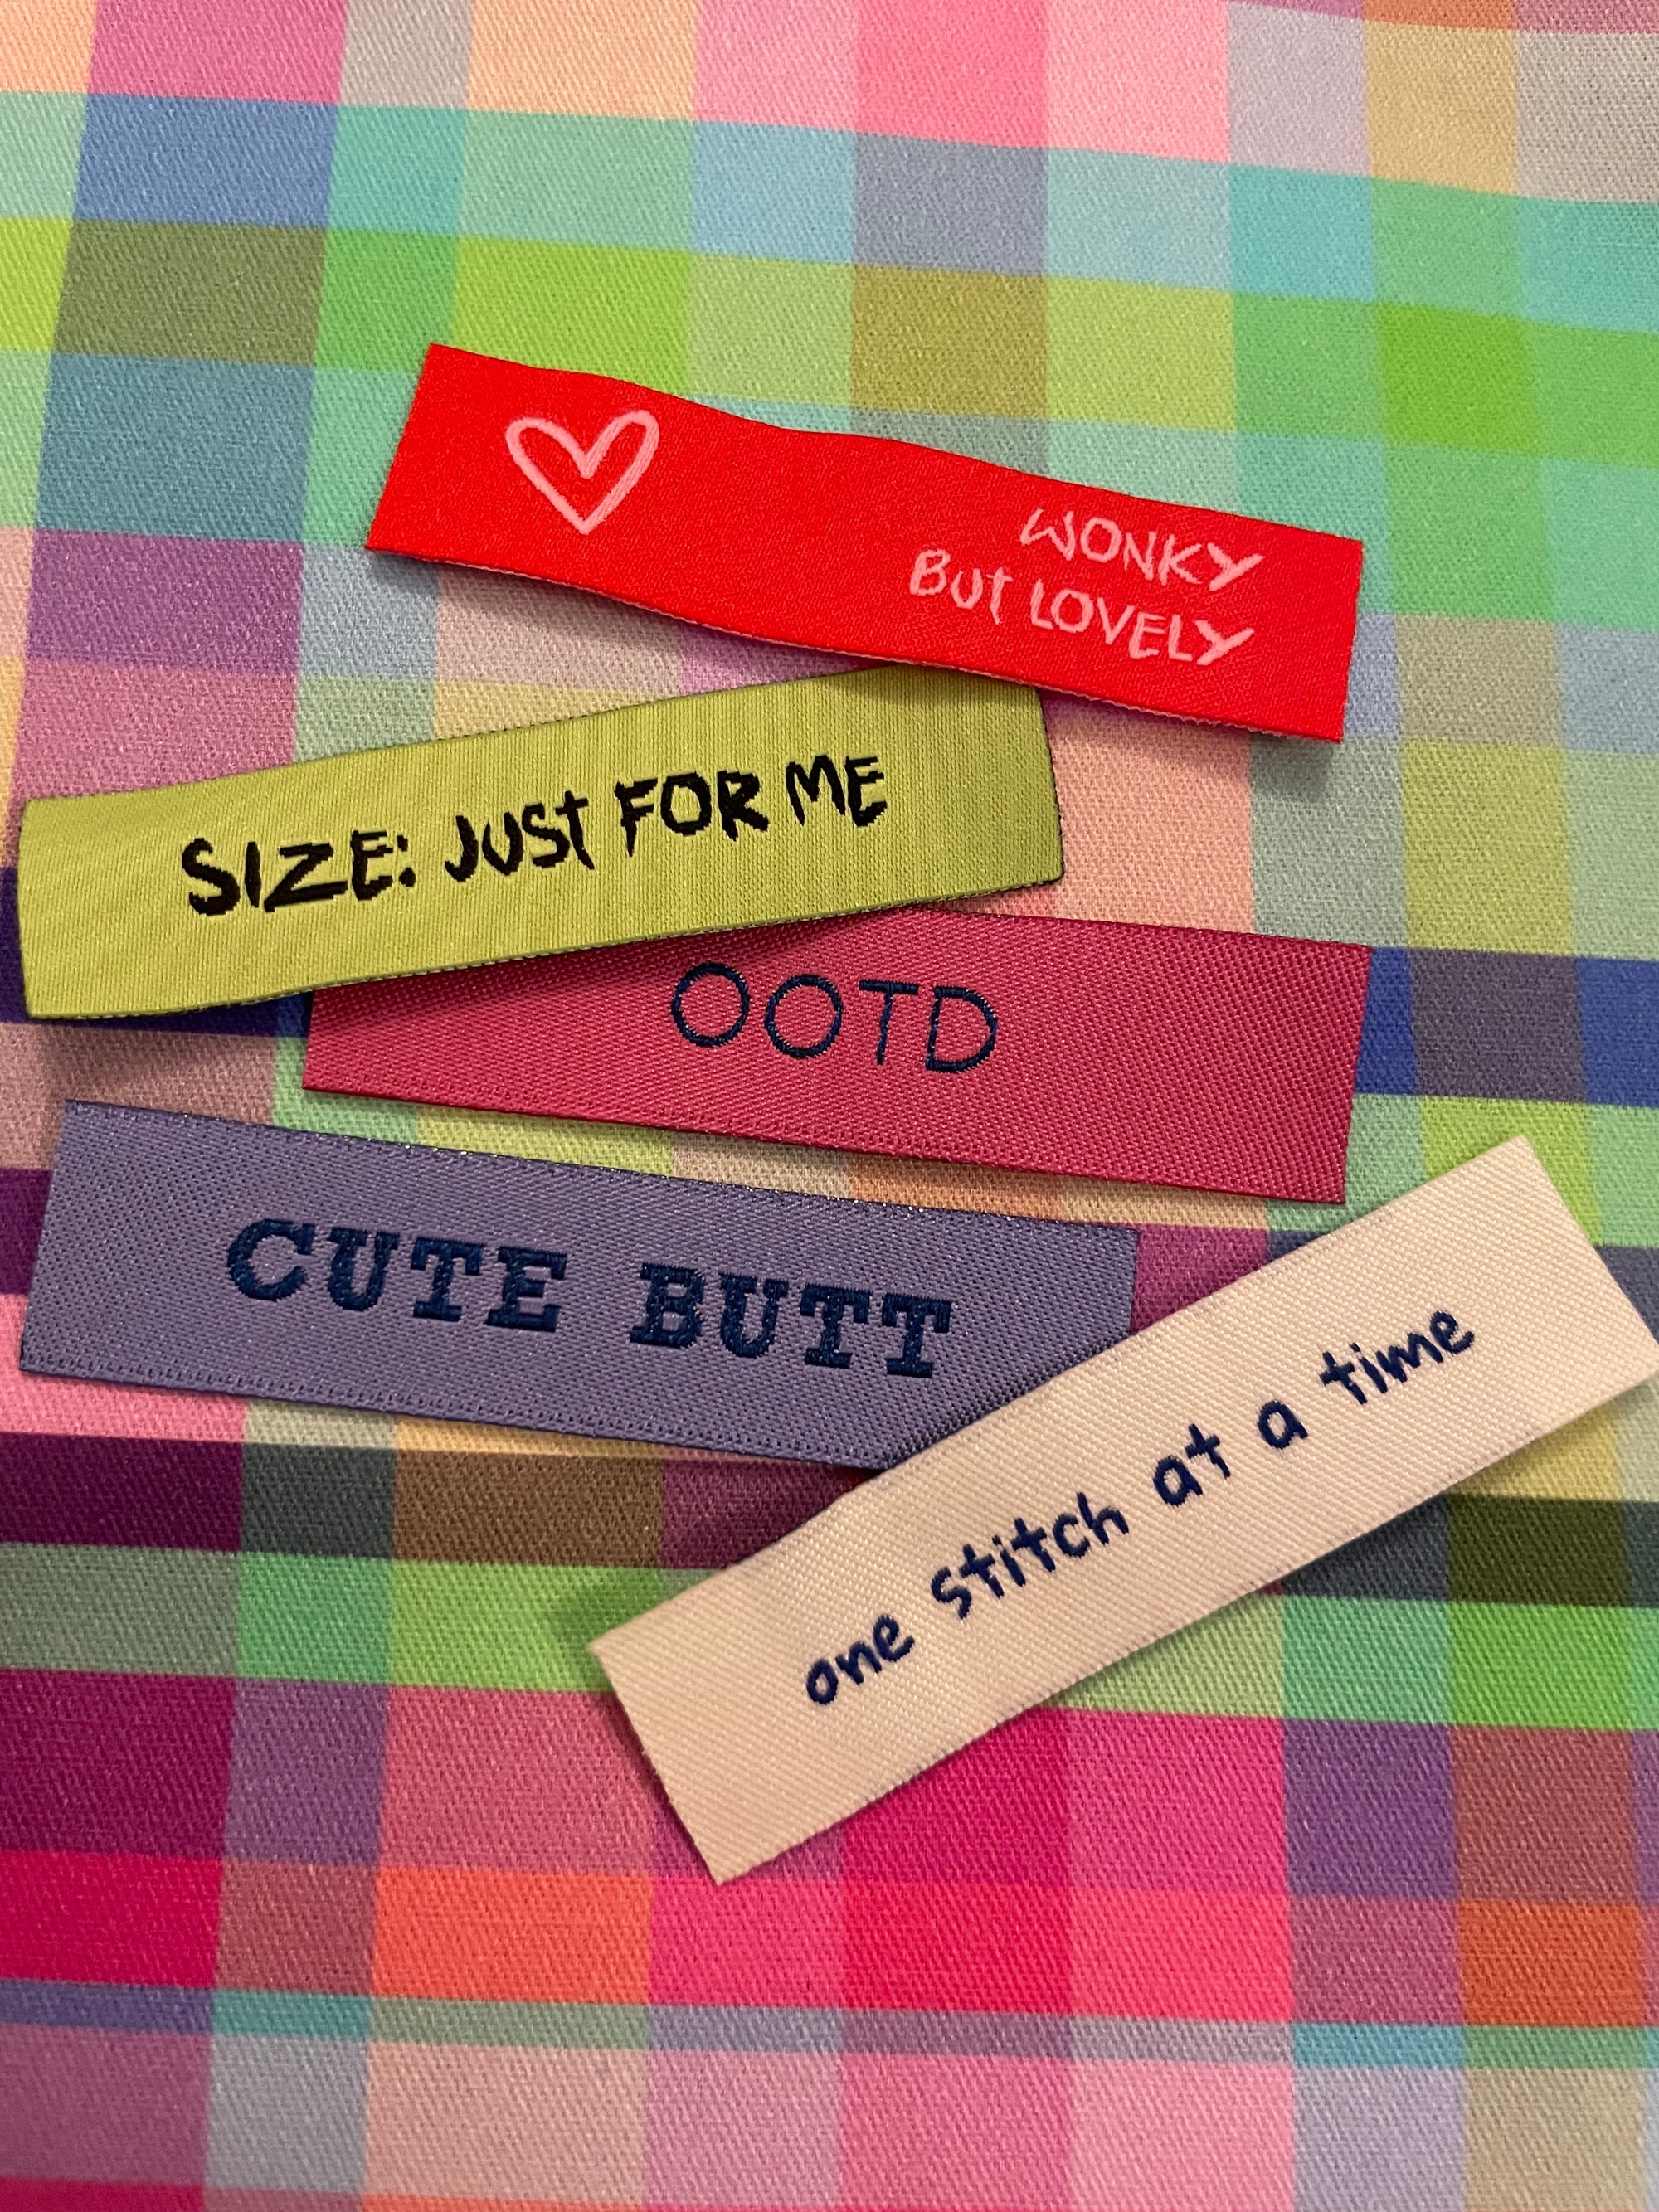 CUTE Don't Label Me pack of 10 Labels by Suzz in Colour